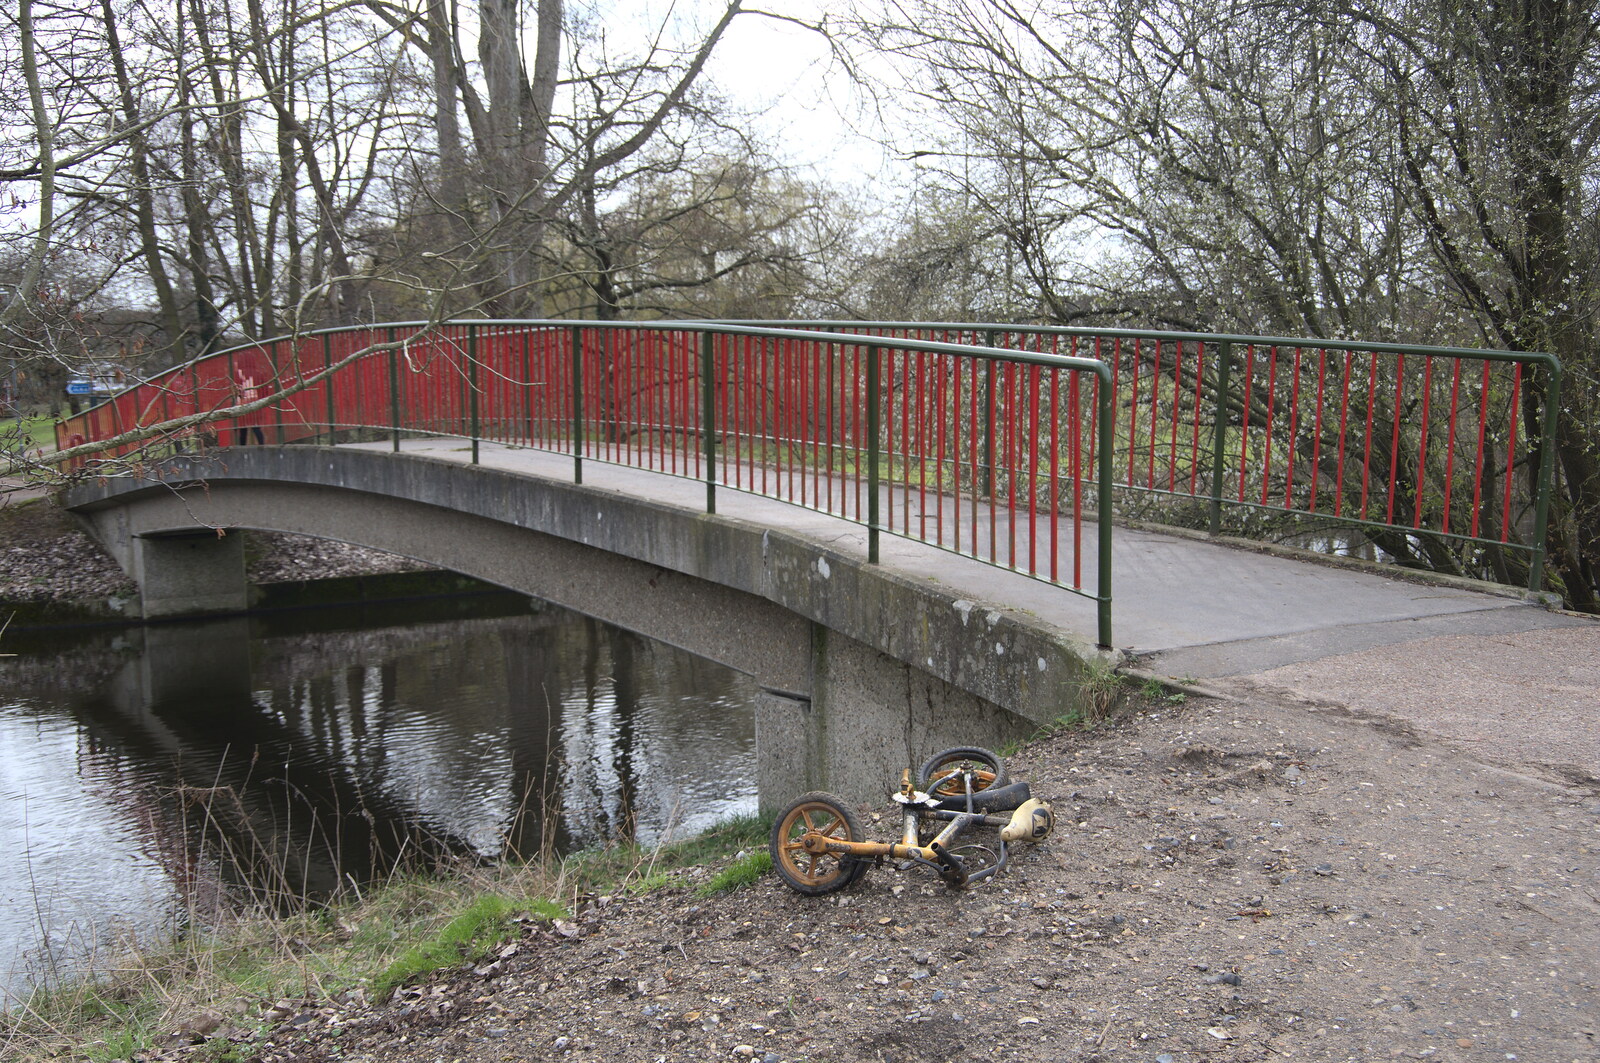 A wrecked child's bicycle and a footbridge from A Postcard from Thetford, Norfolk - 15th March 2023